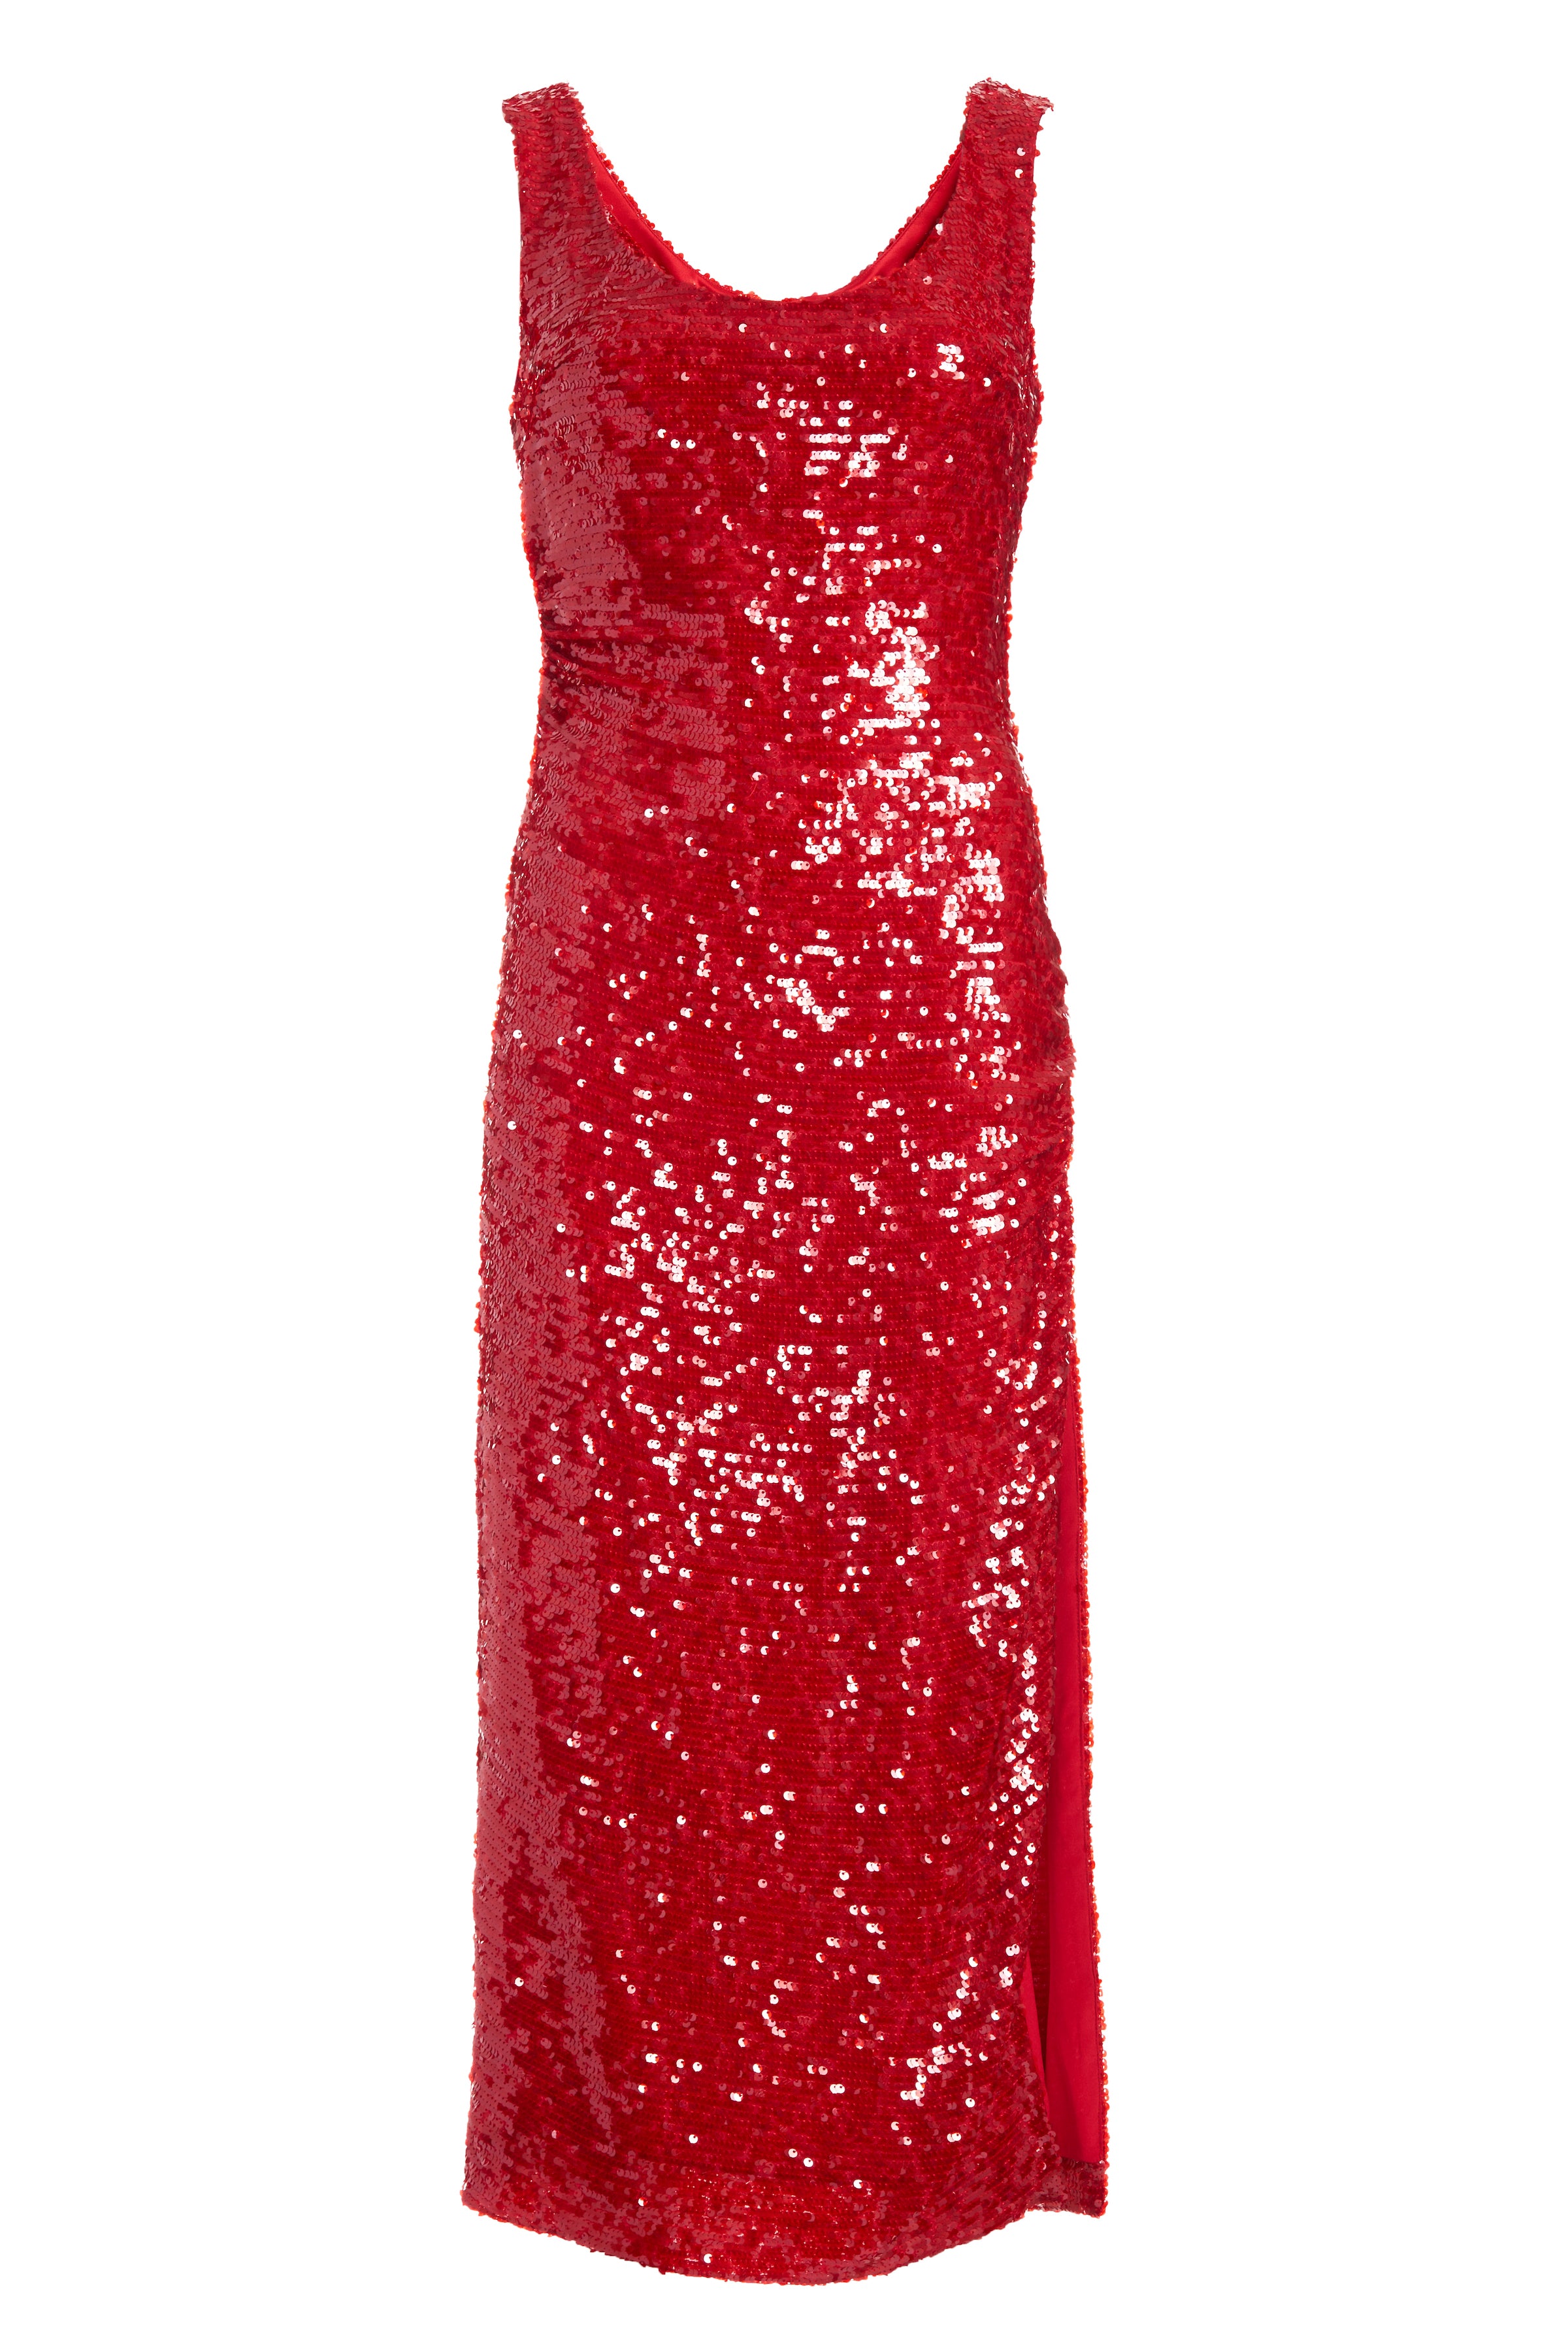 Red Sparkly Sequin Dress - Sequin Dress - Backless Maxi Dress - Lulus